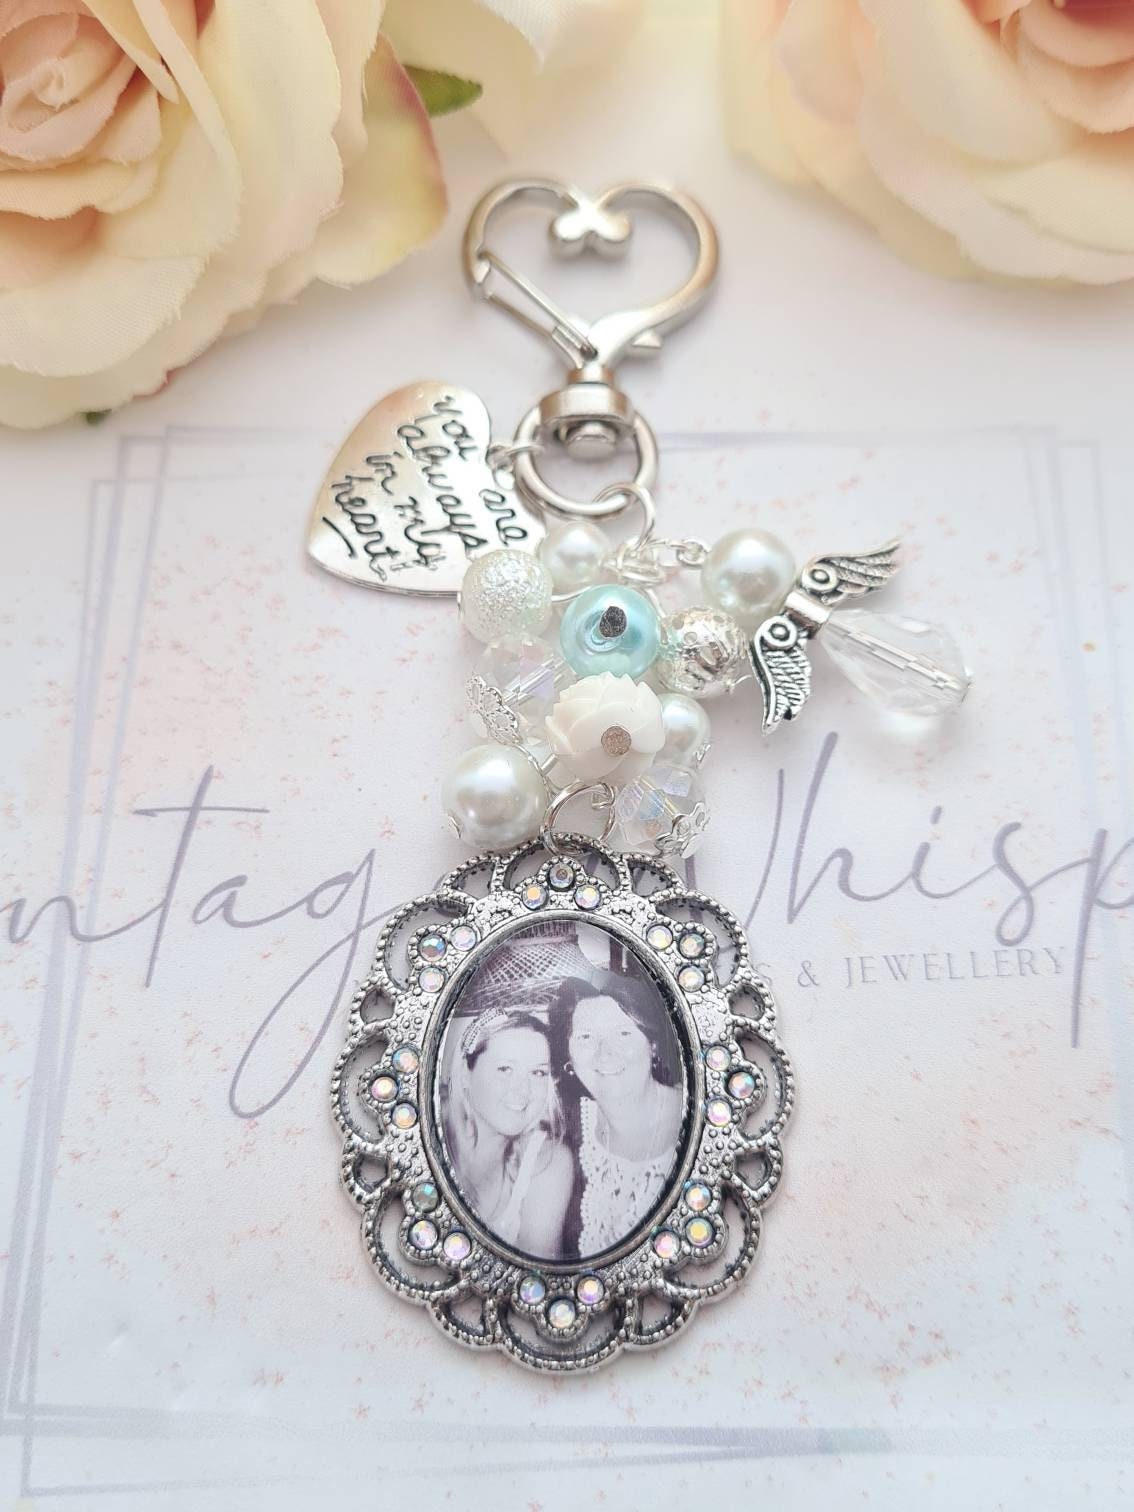 Jewellery Cremation & Memorial Jewellery Photo Bouquet Charm Memory Picture Silver Bridal Charm Personalised Remembrance Keepsake Gift Memorial 